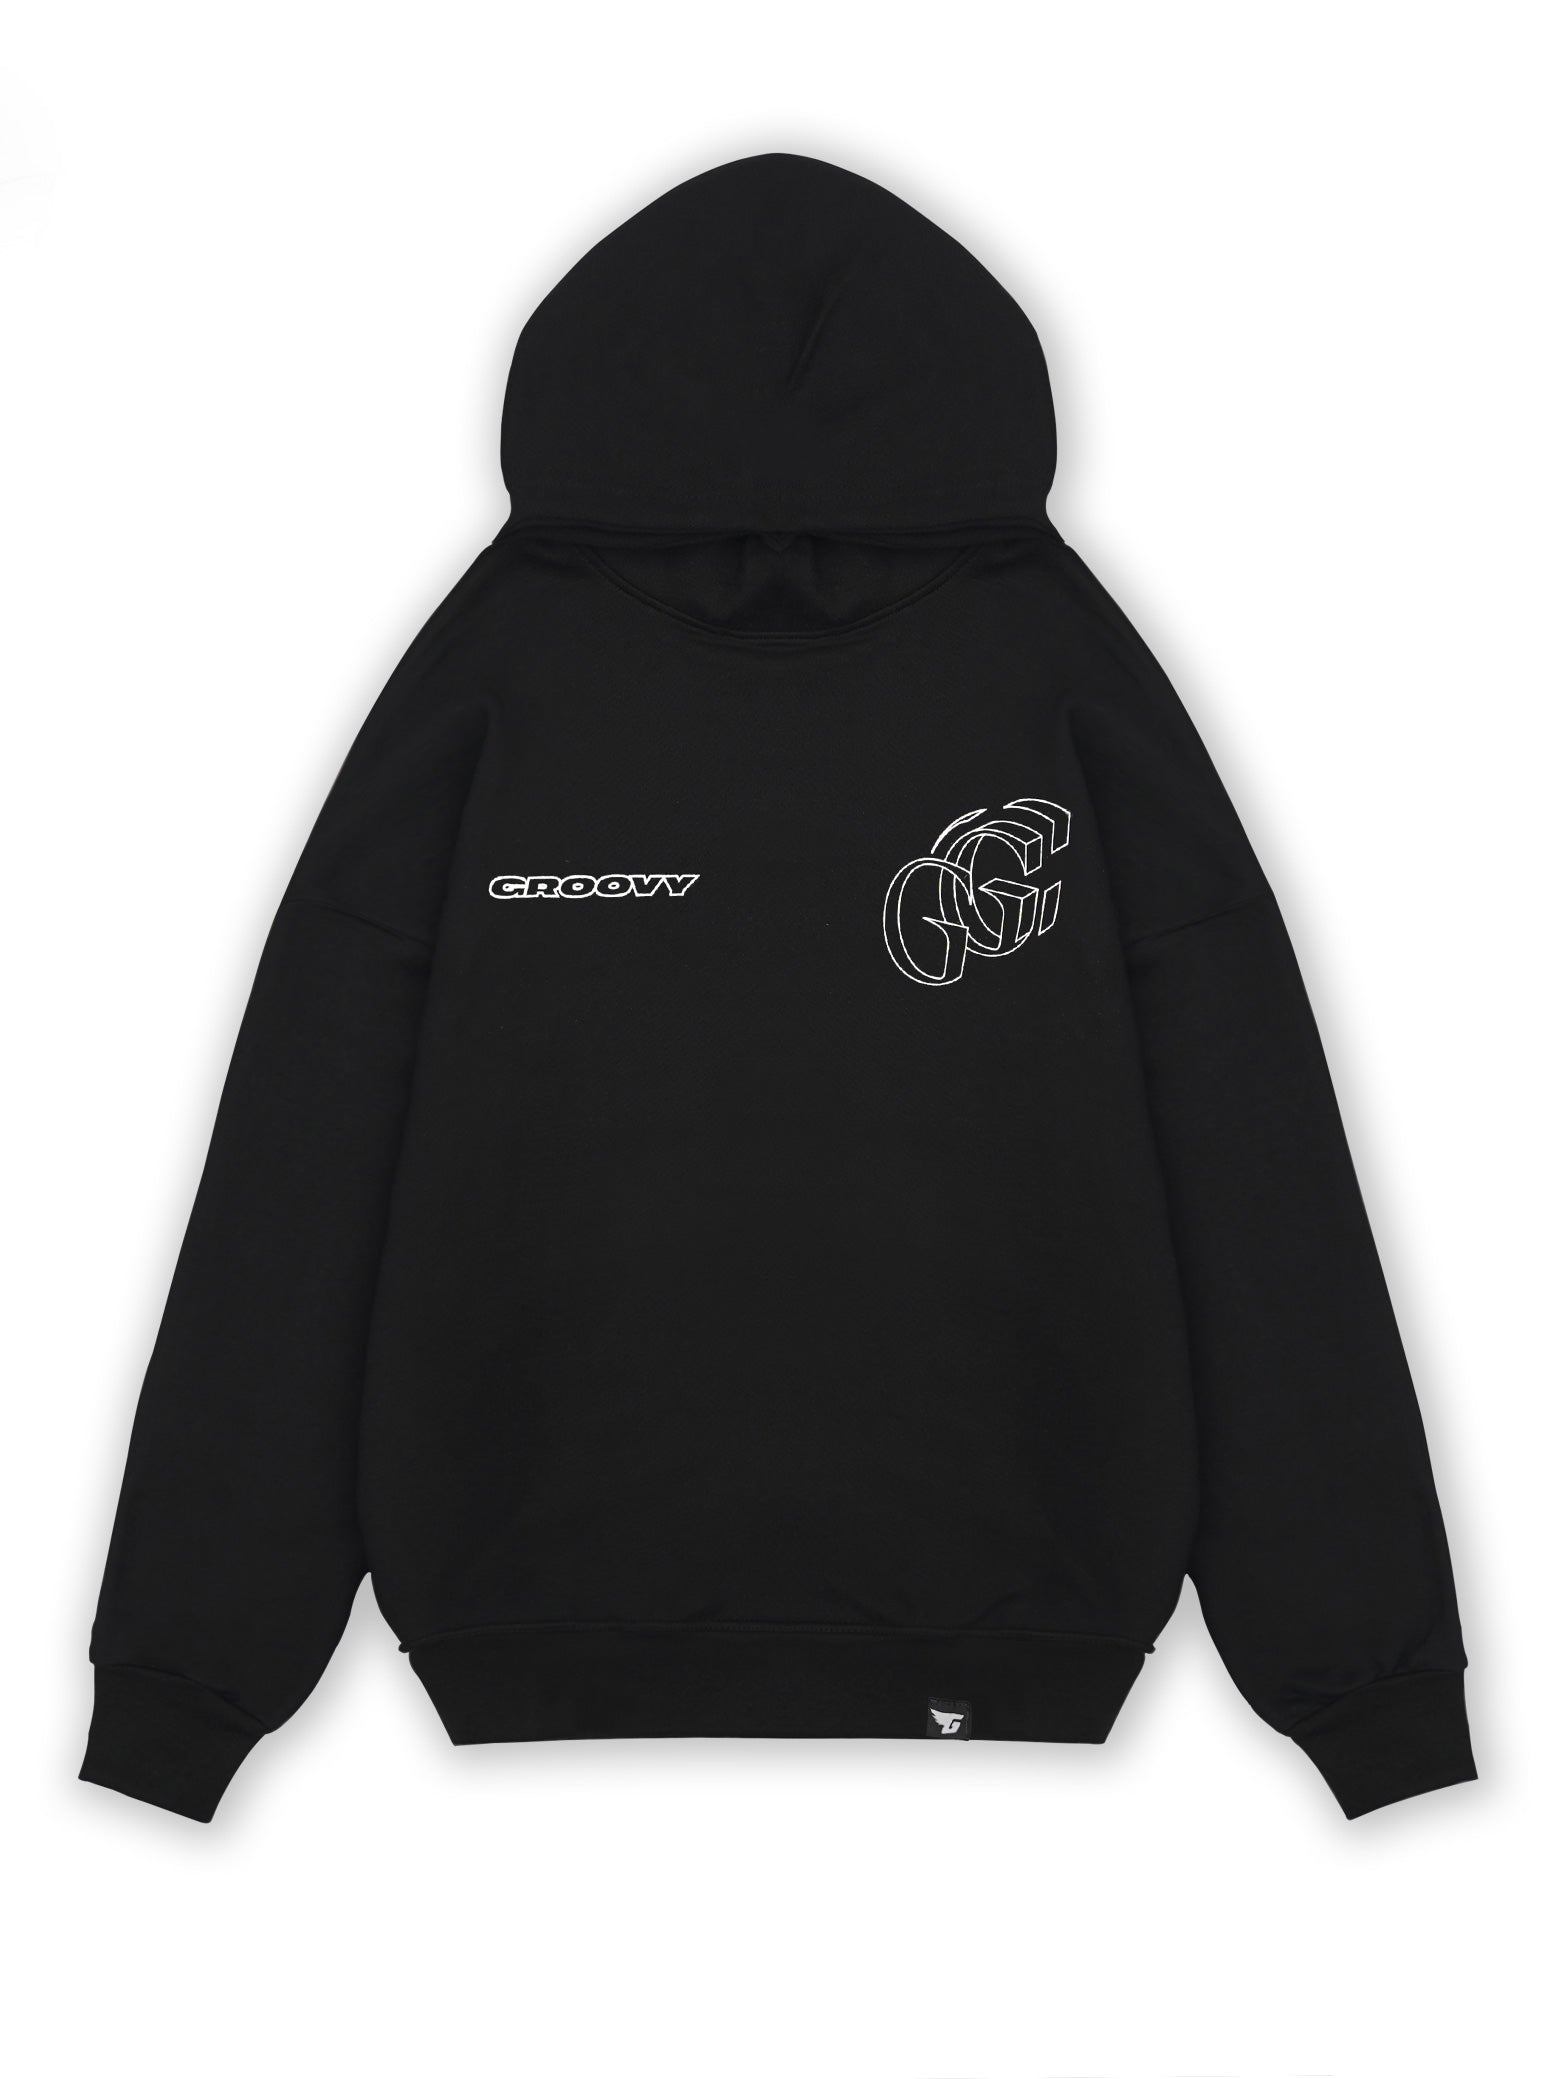 Initial Assembly Hoodie